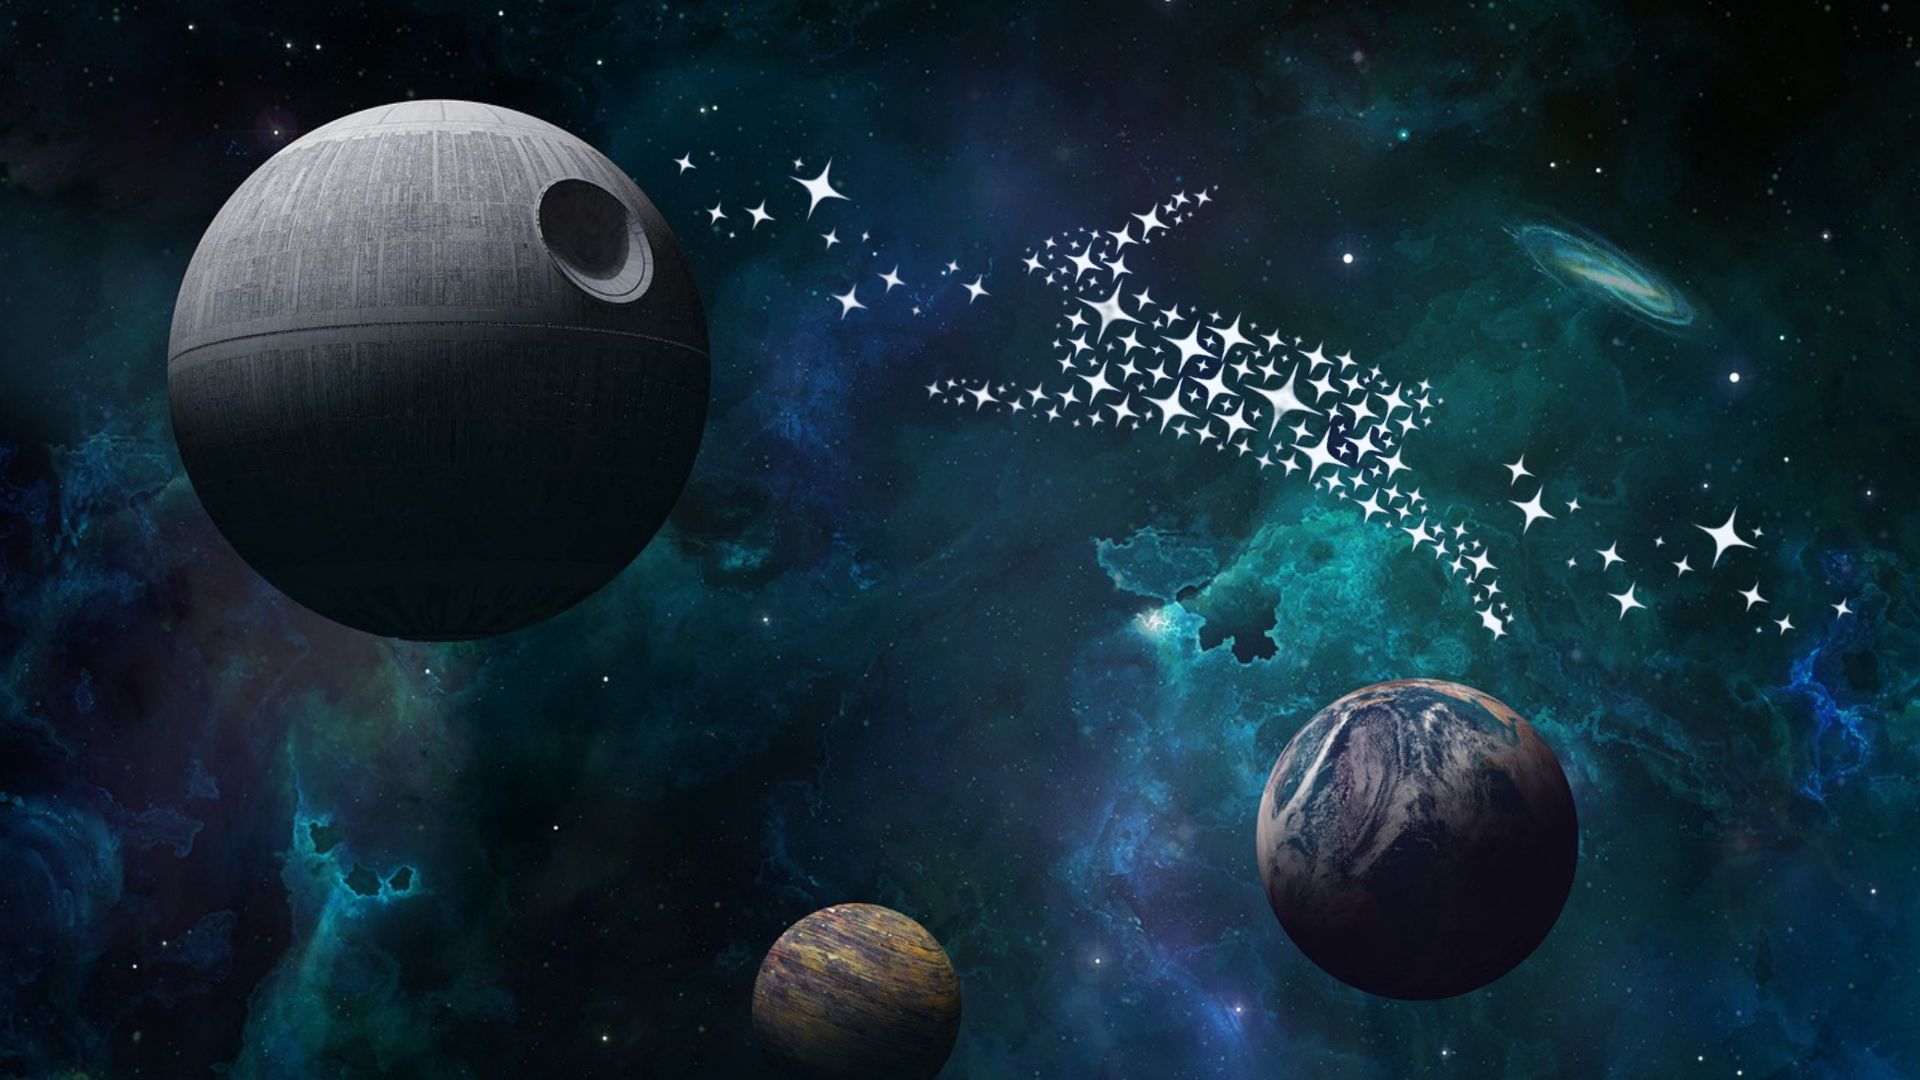 outer space background with the Star Wars Death star on the left and a PETA bunny made of stars leaping toward the Death Star